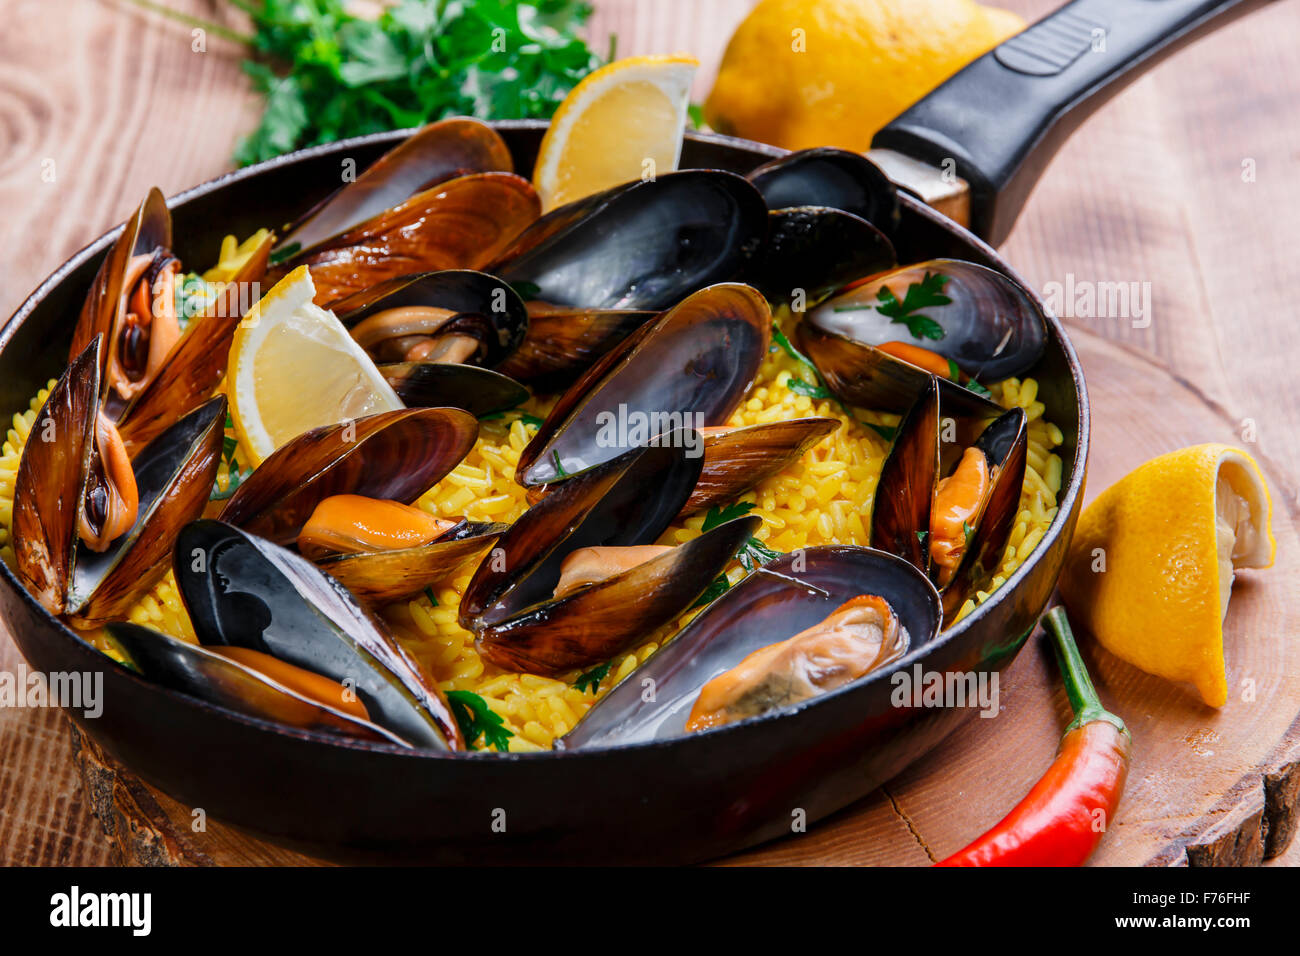 mussel paella rice in a frying pan Stock Photo